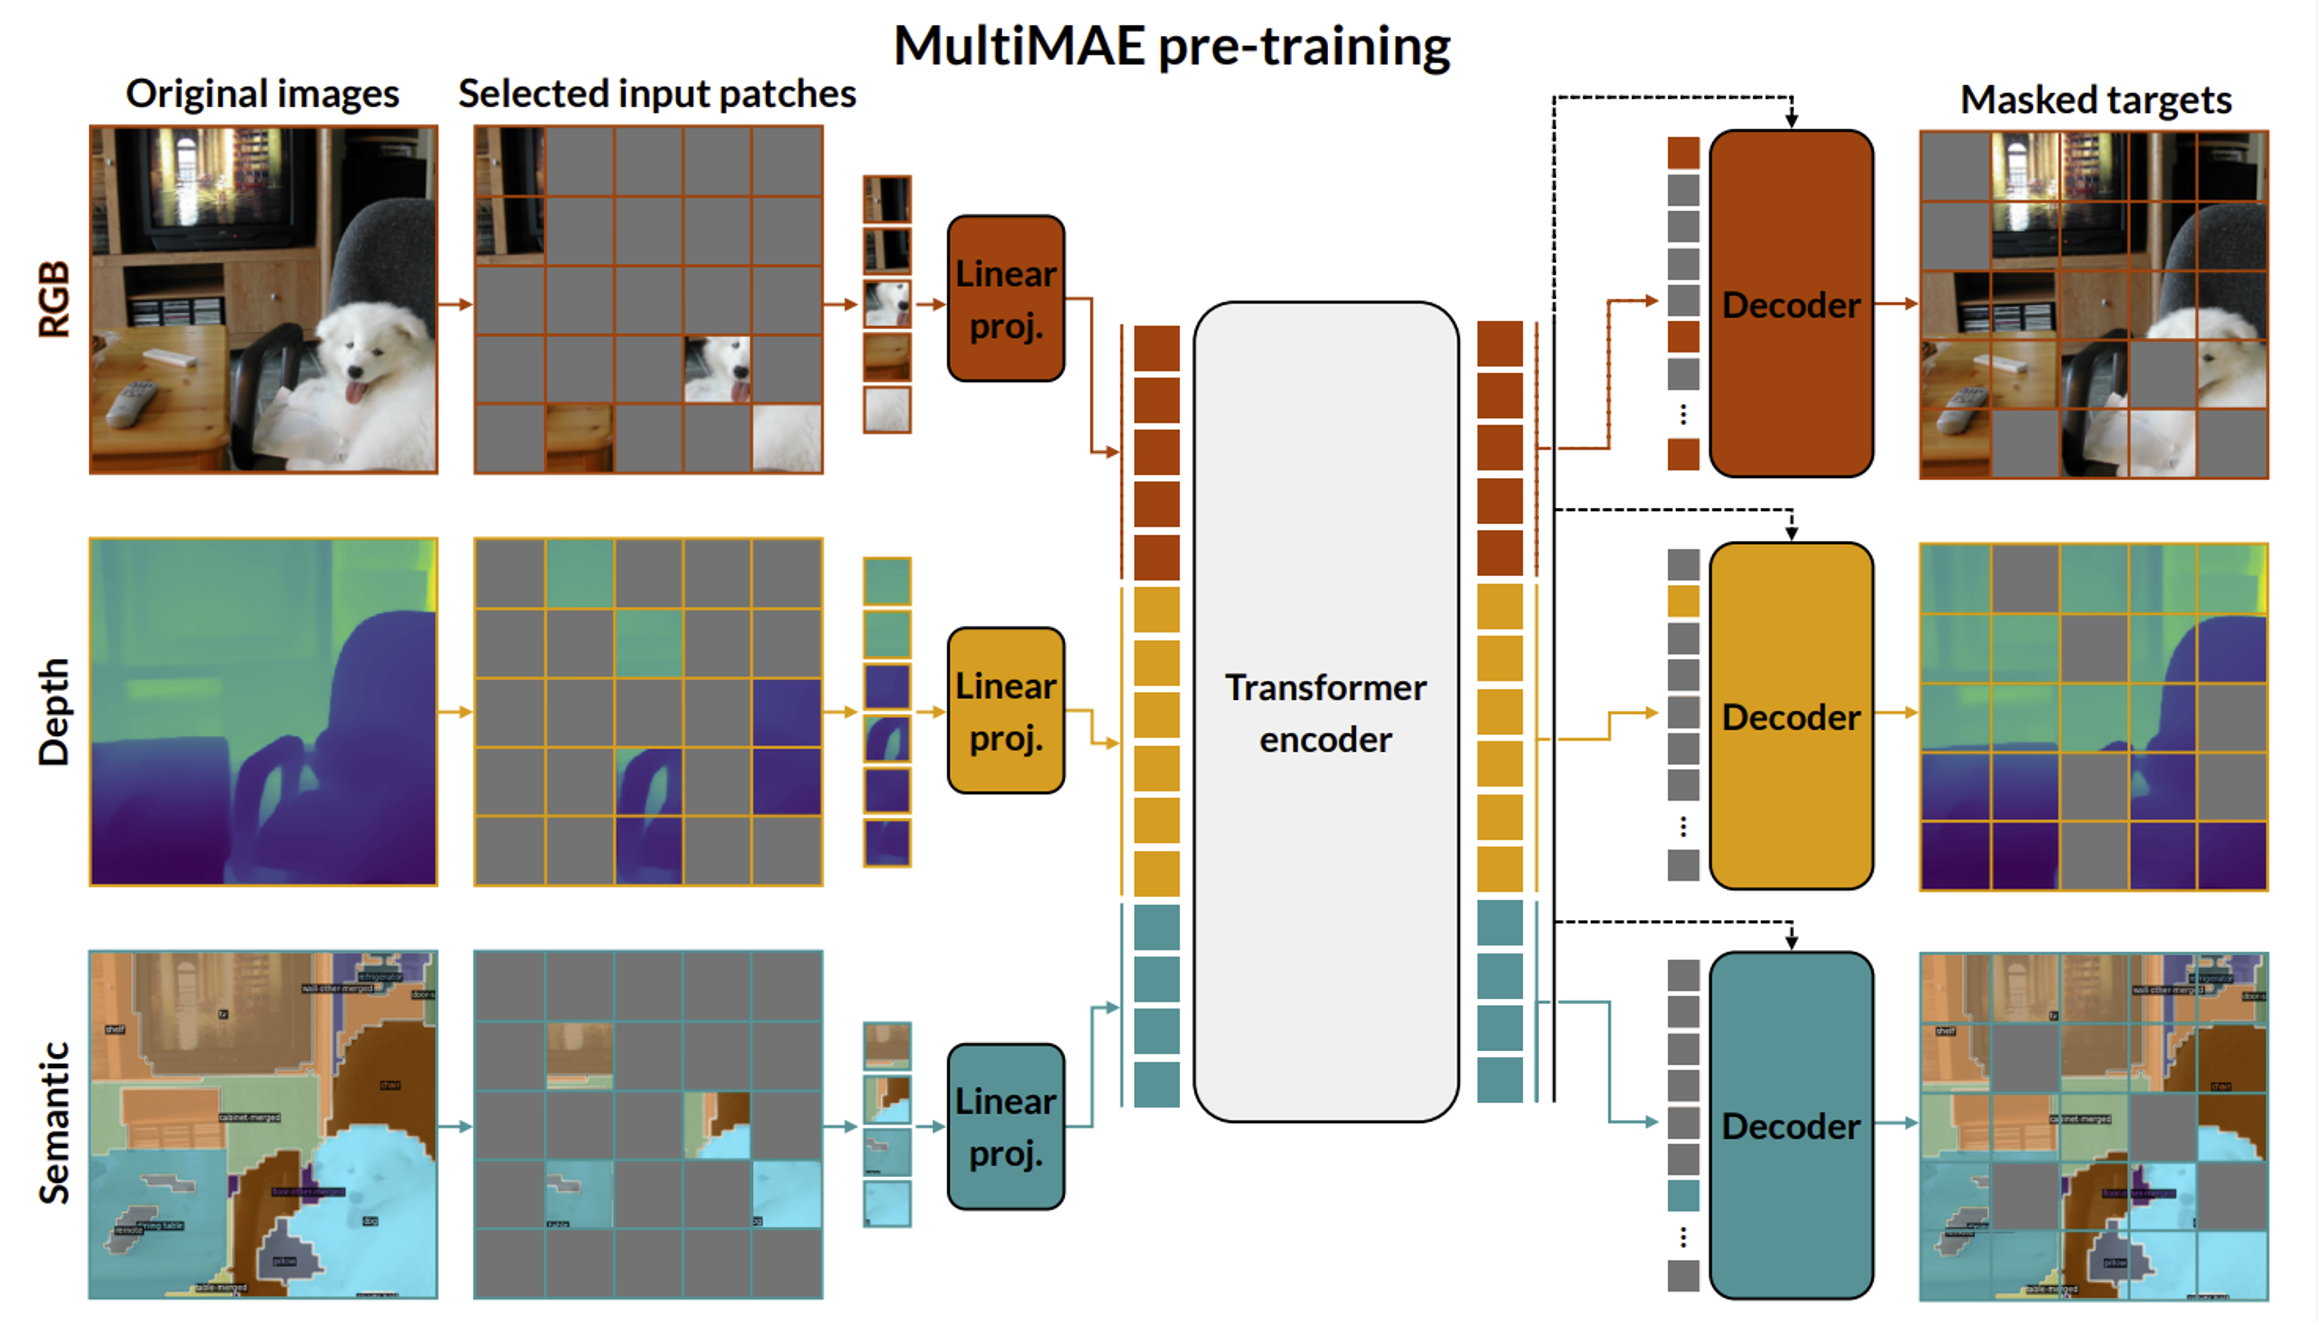 Masking and cross-modal prediction visualized for MultiMAE[@bachmann2022multimae].